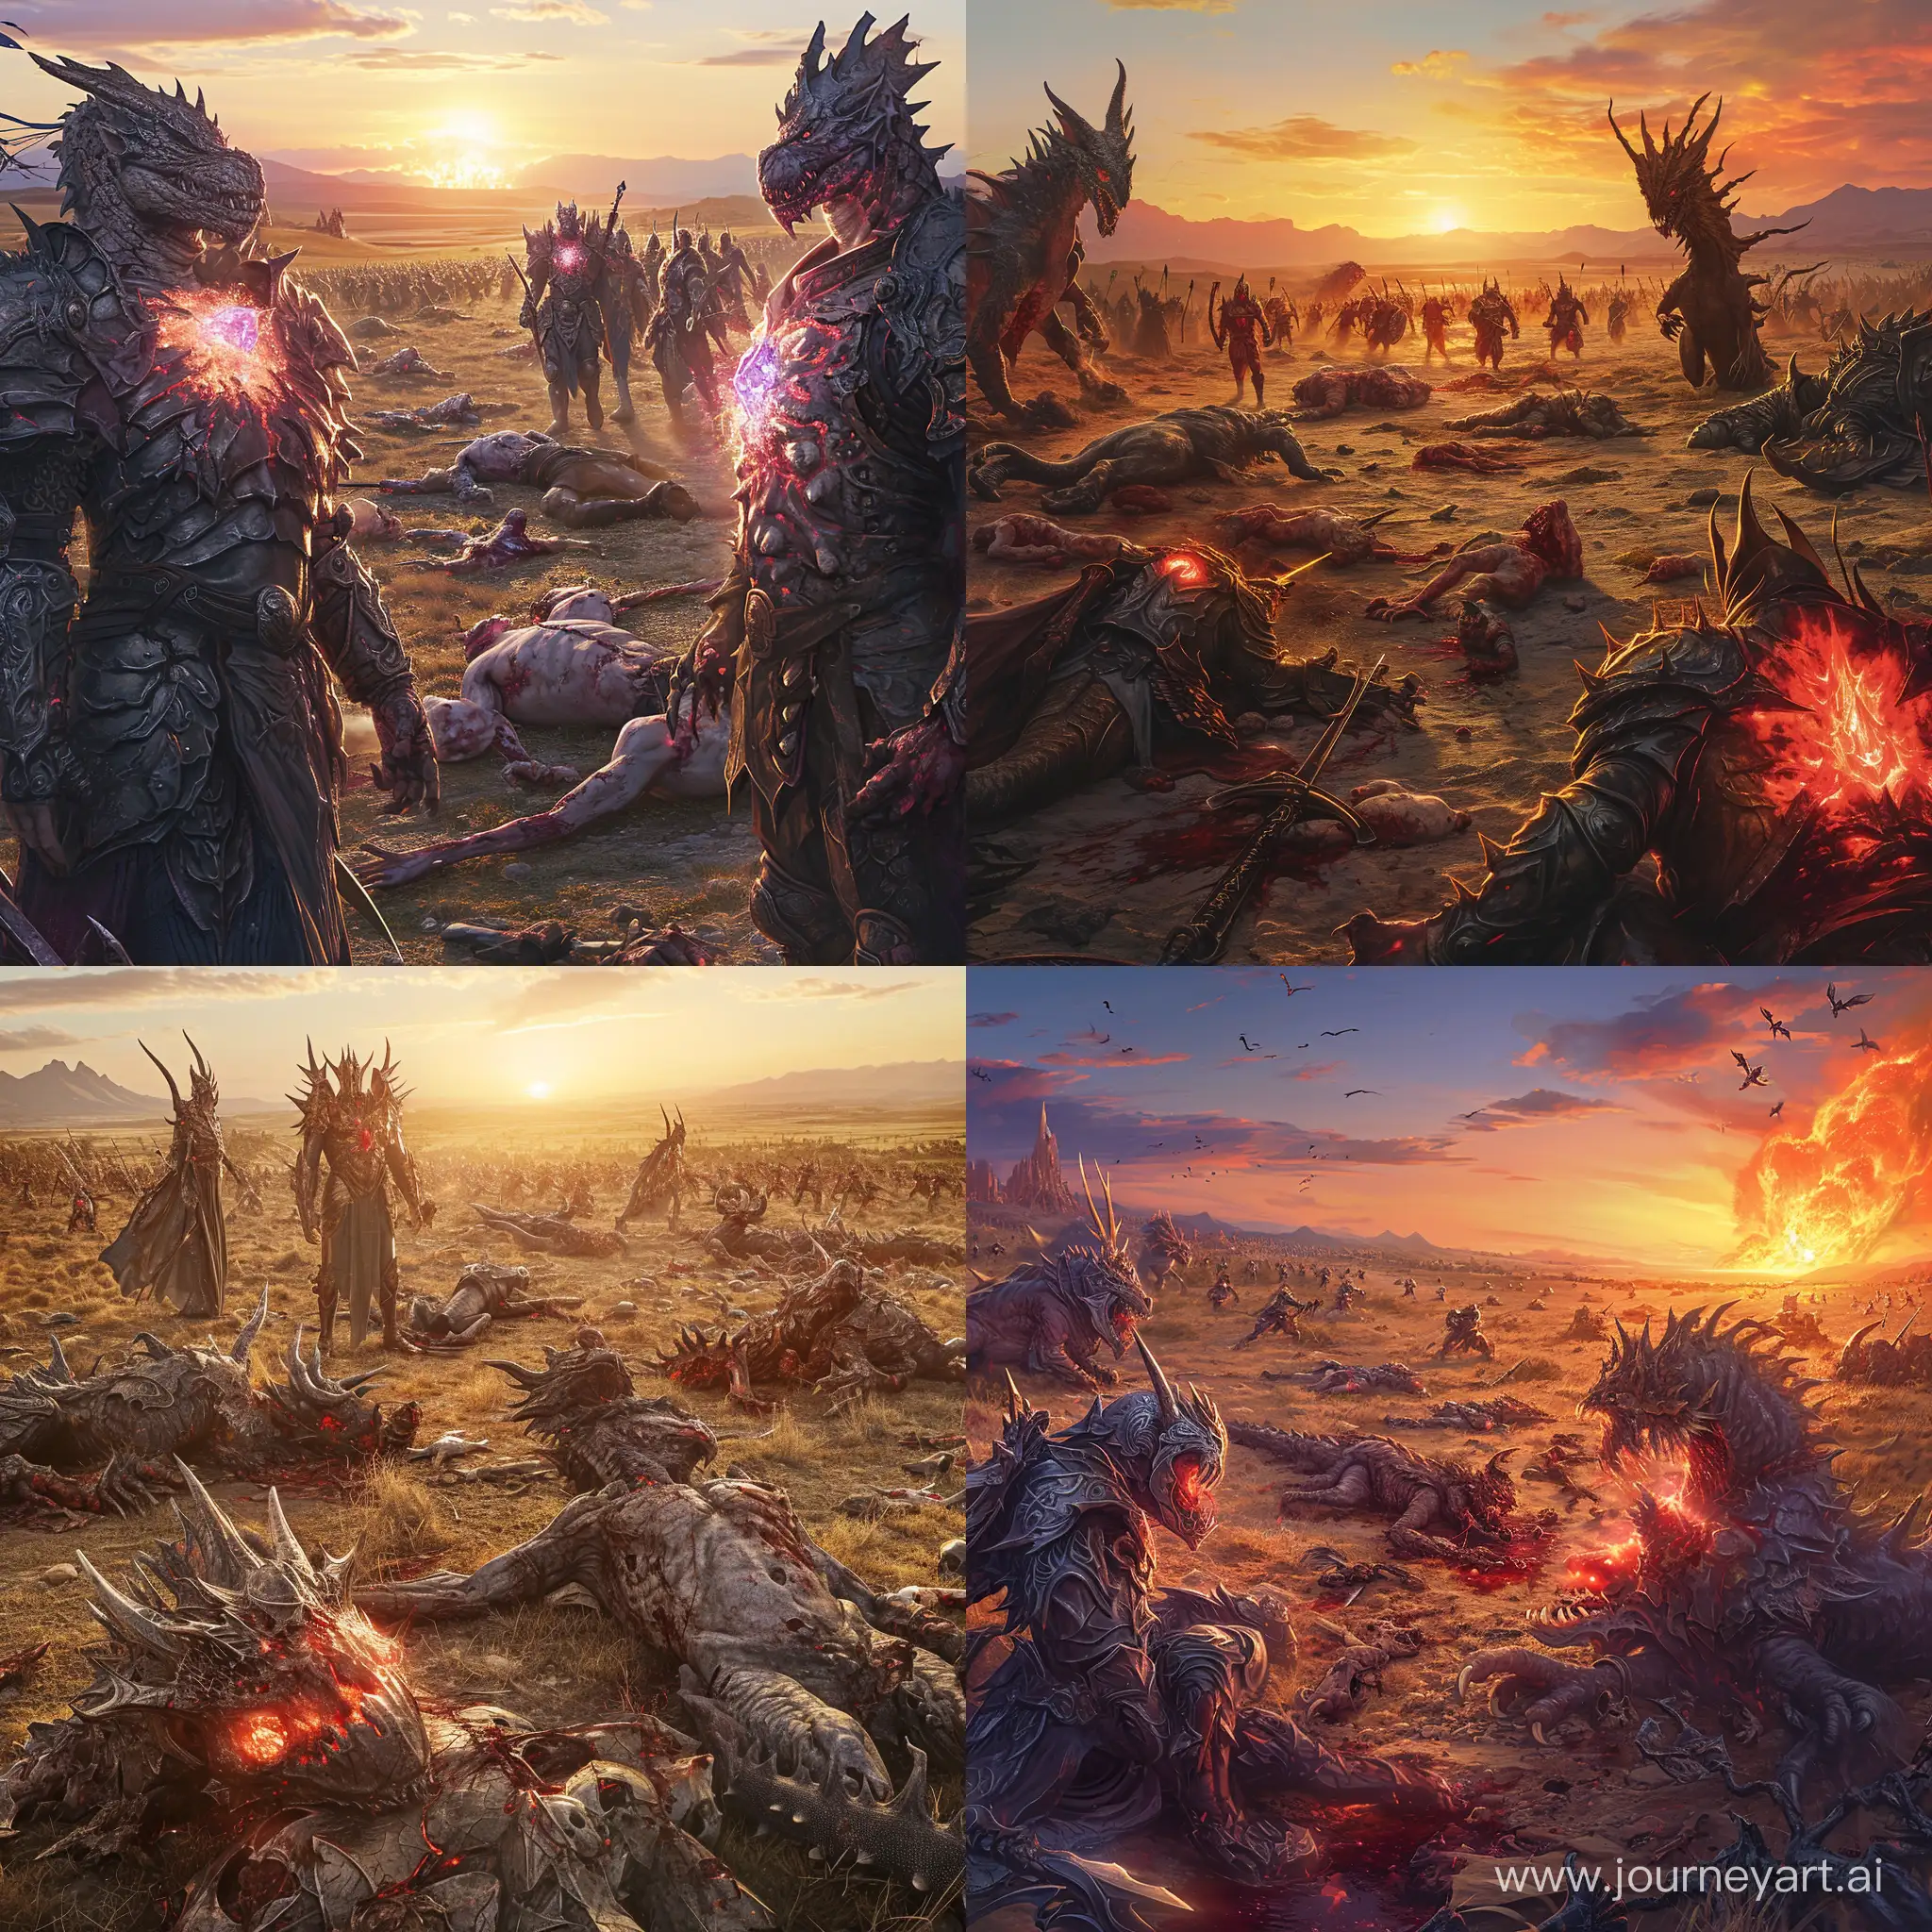 Generate image a battle between two
armies. First covenant army assembled
of elves, human, dragons, reptile warrior with dragon head. Second Demons of fire with basalt body,heavy, pale complexion, heavy armor,
magic crystal on chests in light glow,
many dead lie on the battlefield, plain,
Hills, sunset, fantasy, epic, 4k, hd